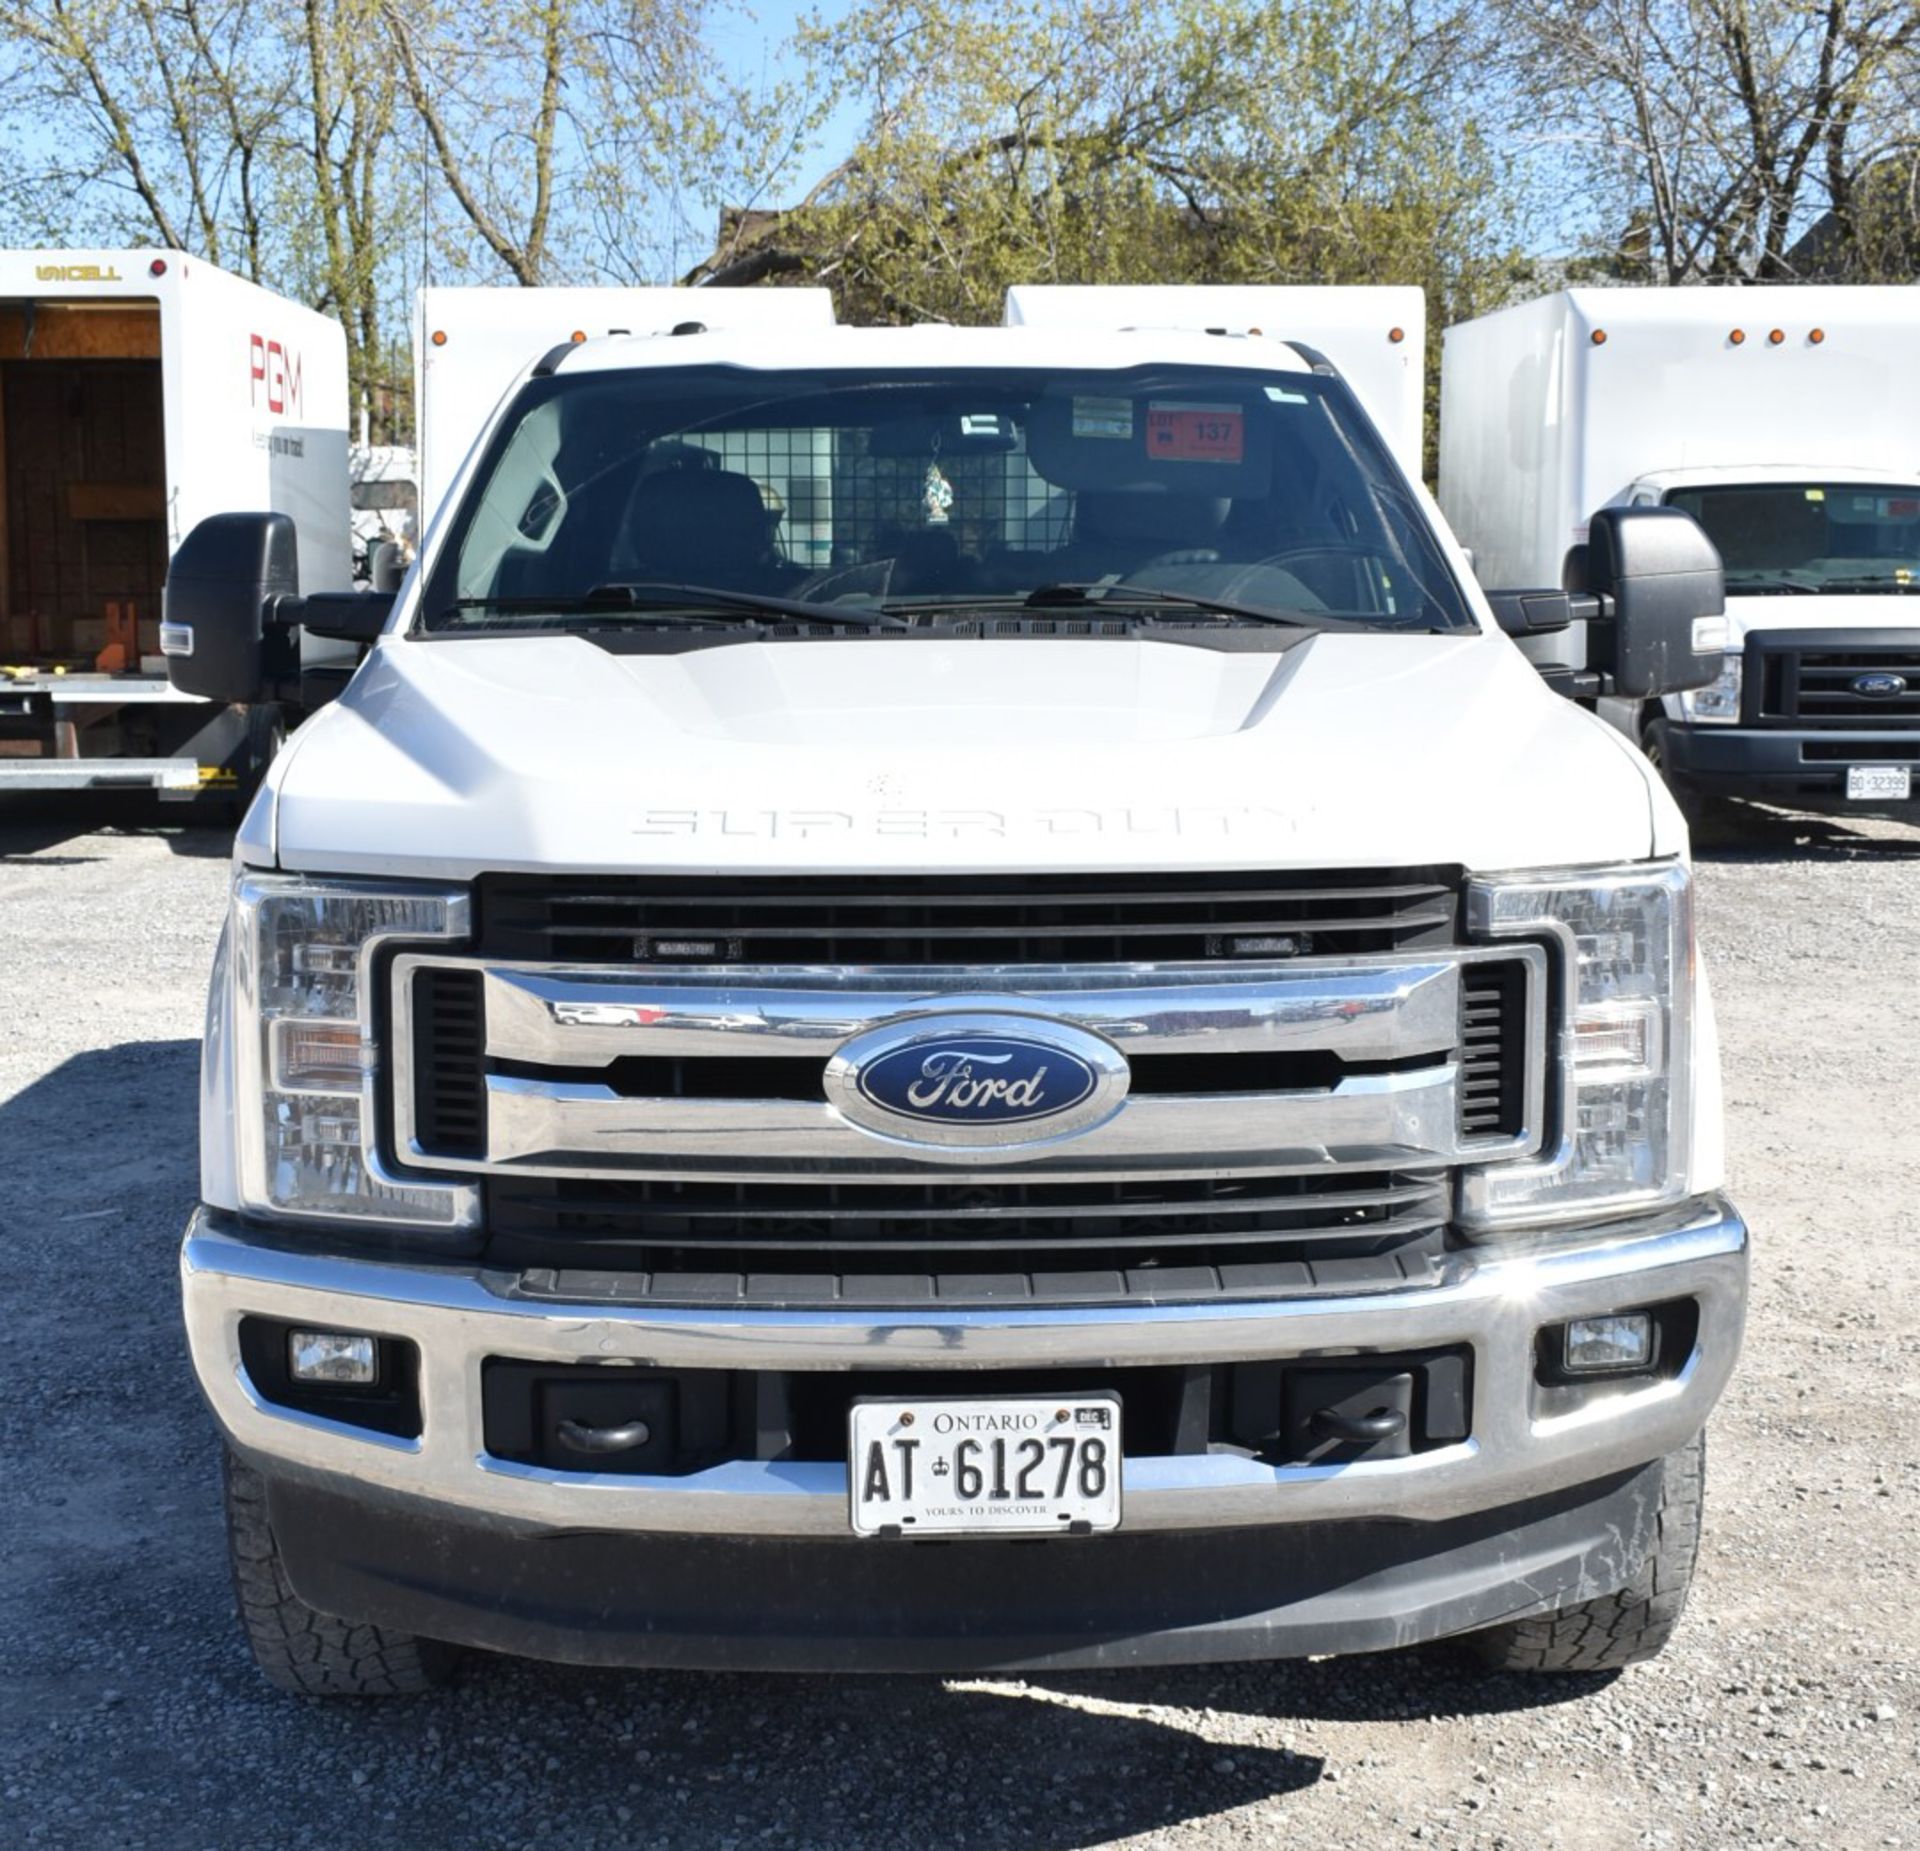 FORD (2017) F250 XLT SUPER DUTY CREW CAB PICKUP TRUCK WITH 6.2L 8 CYL. GAS ENGINE, AUTO. - Image 6 of 15